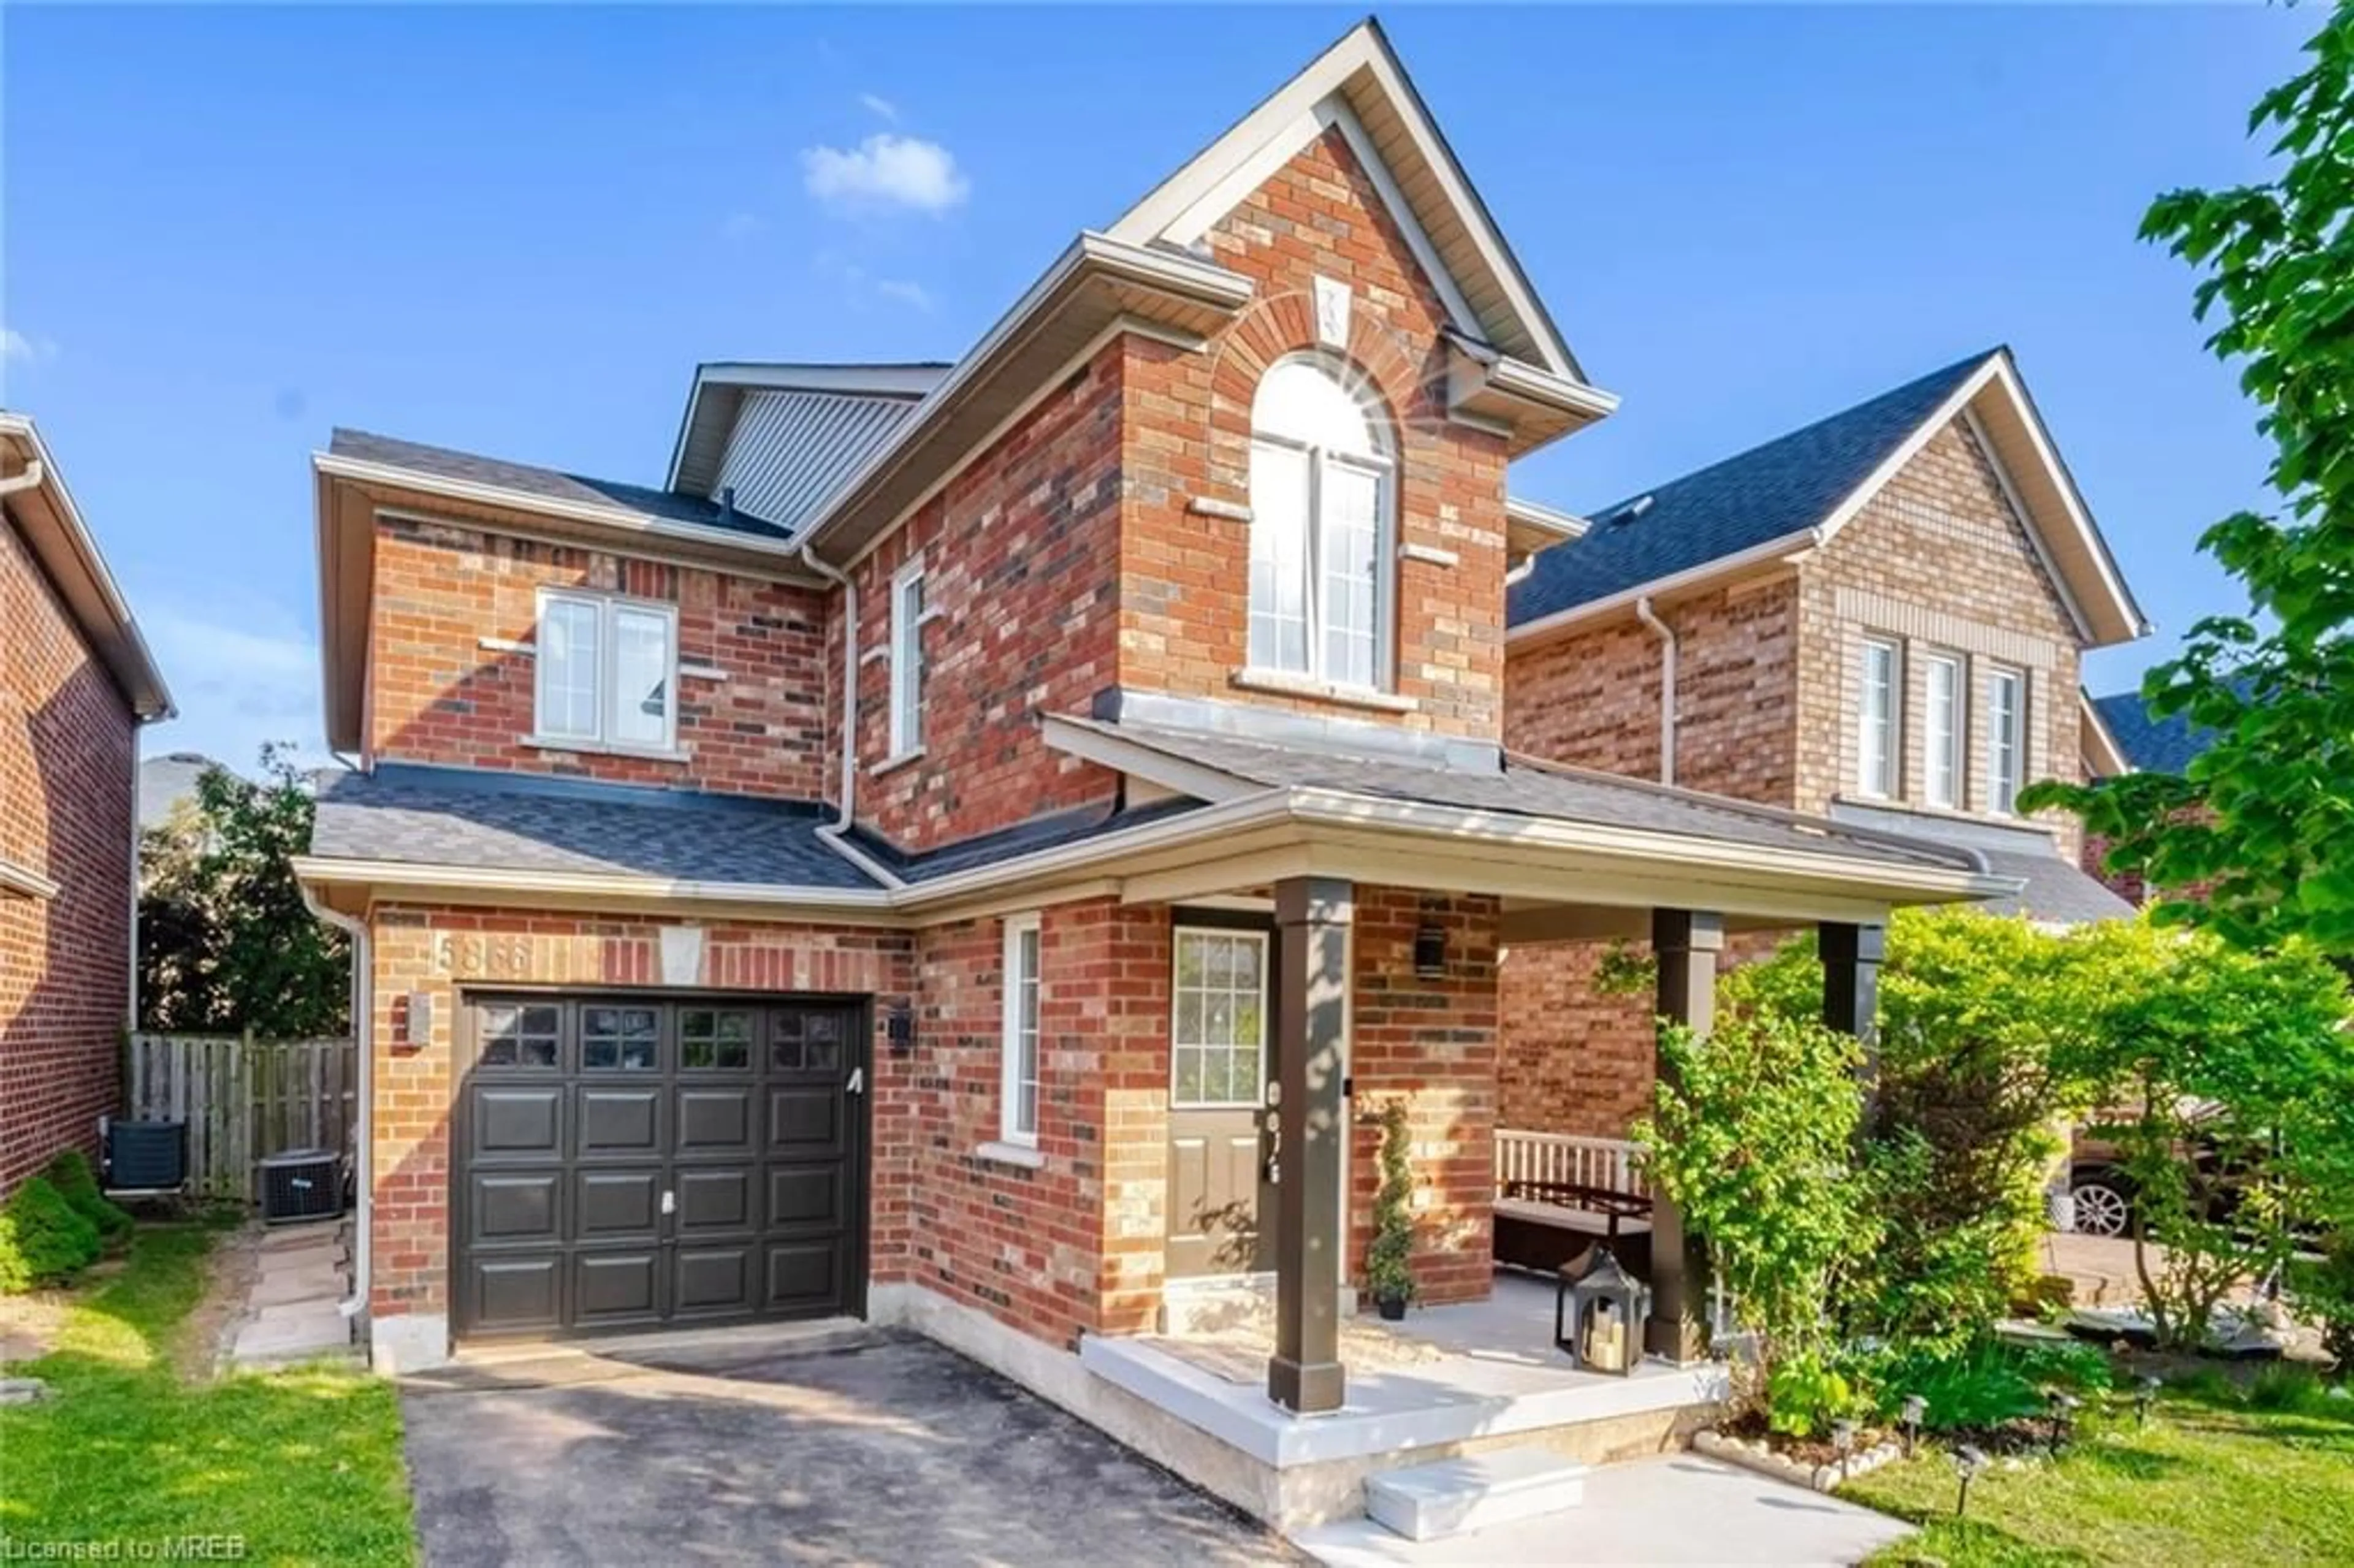 Home with brick exterior material for 5866 Blue Spruce Ave, Burlington Ontario L7L 7N8